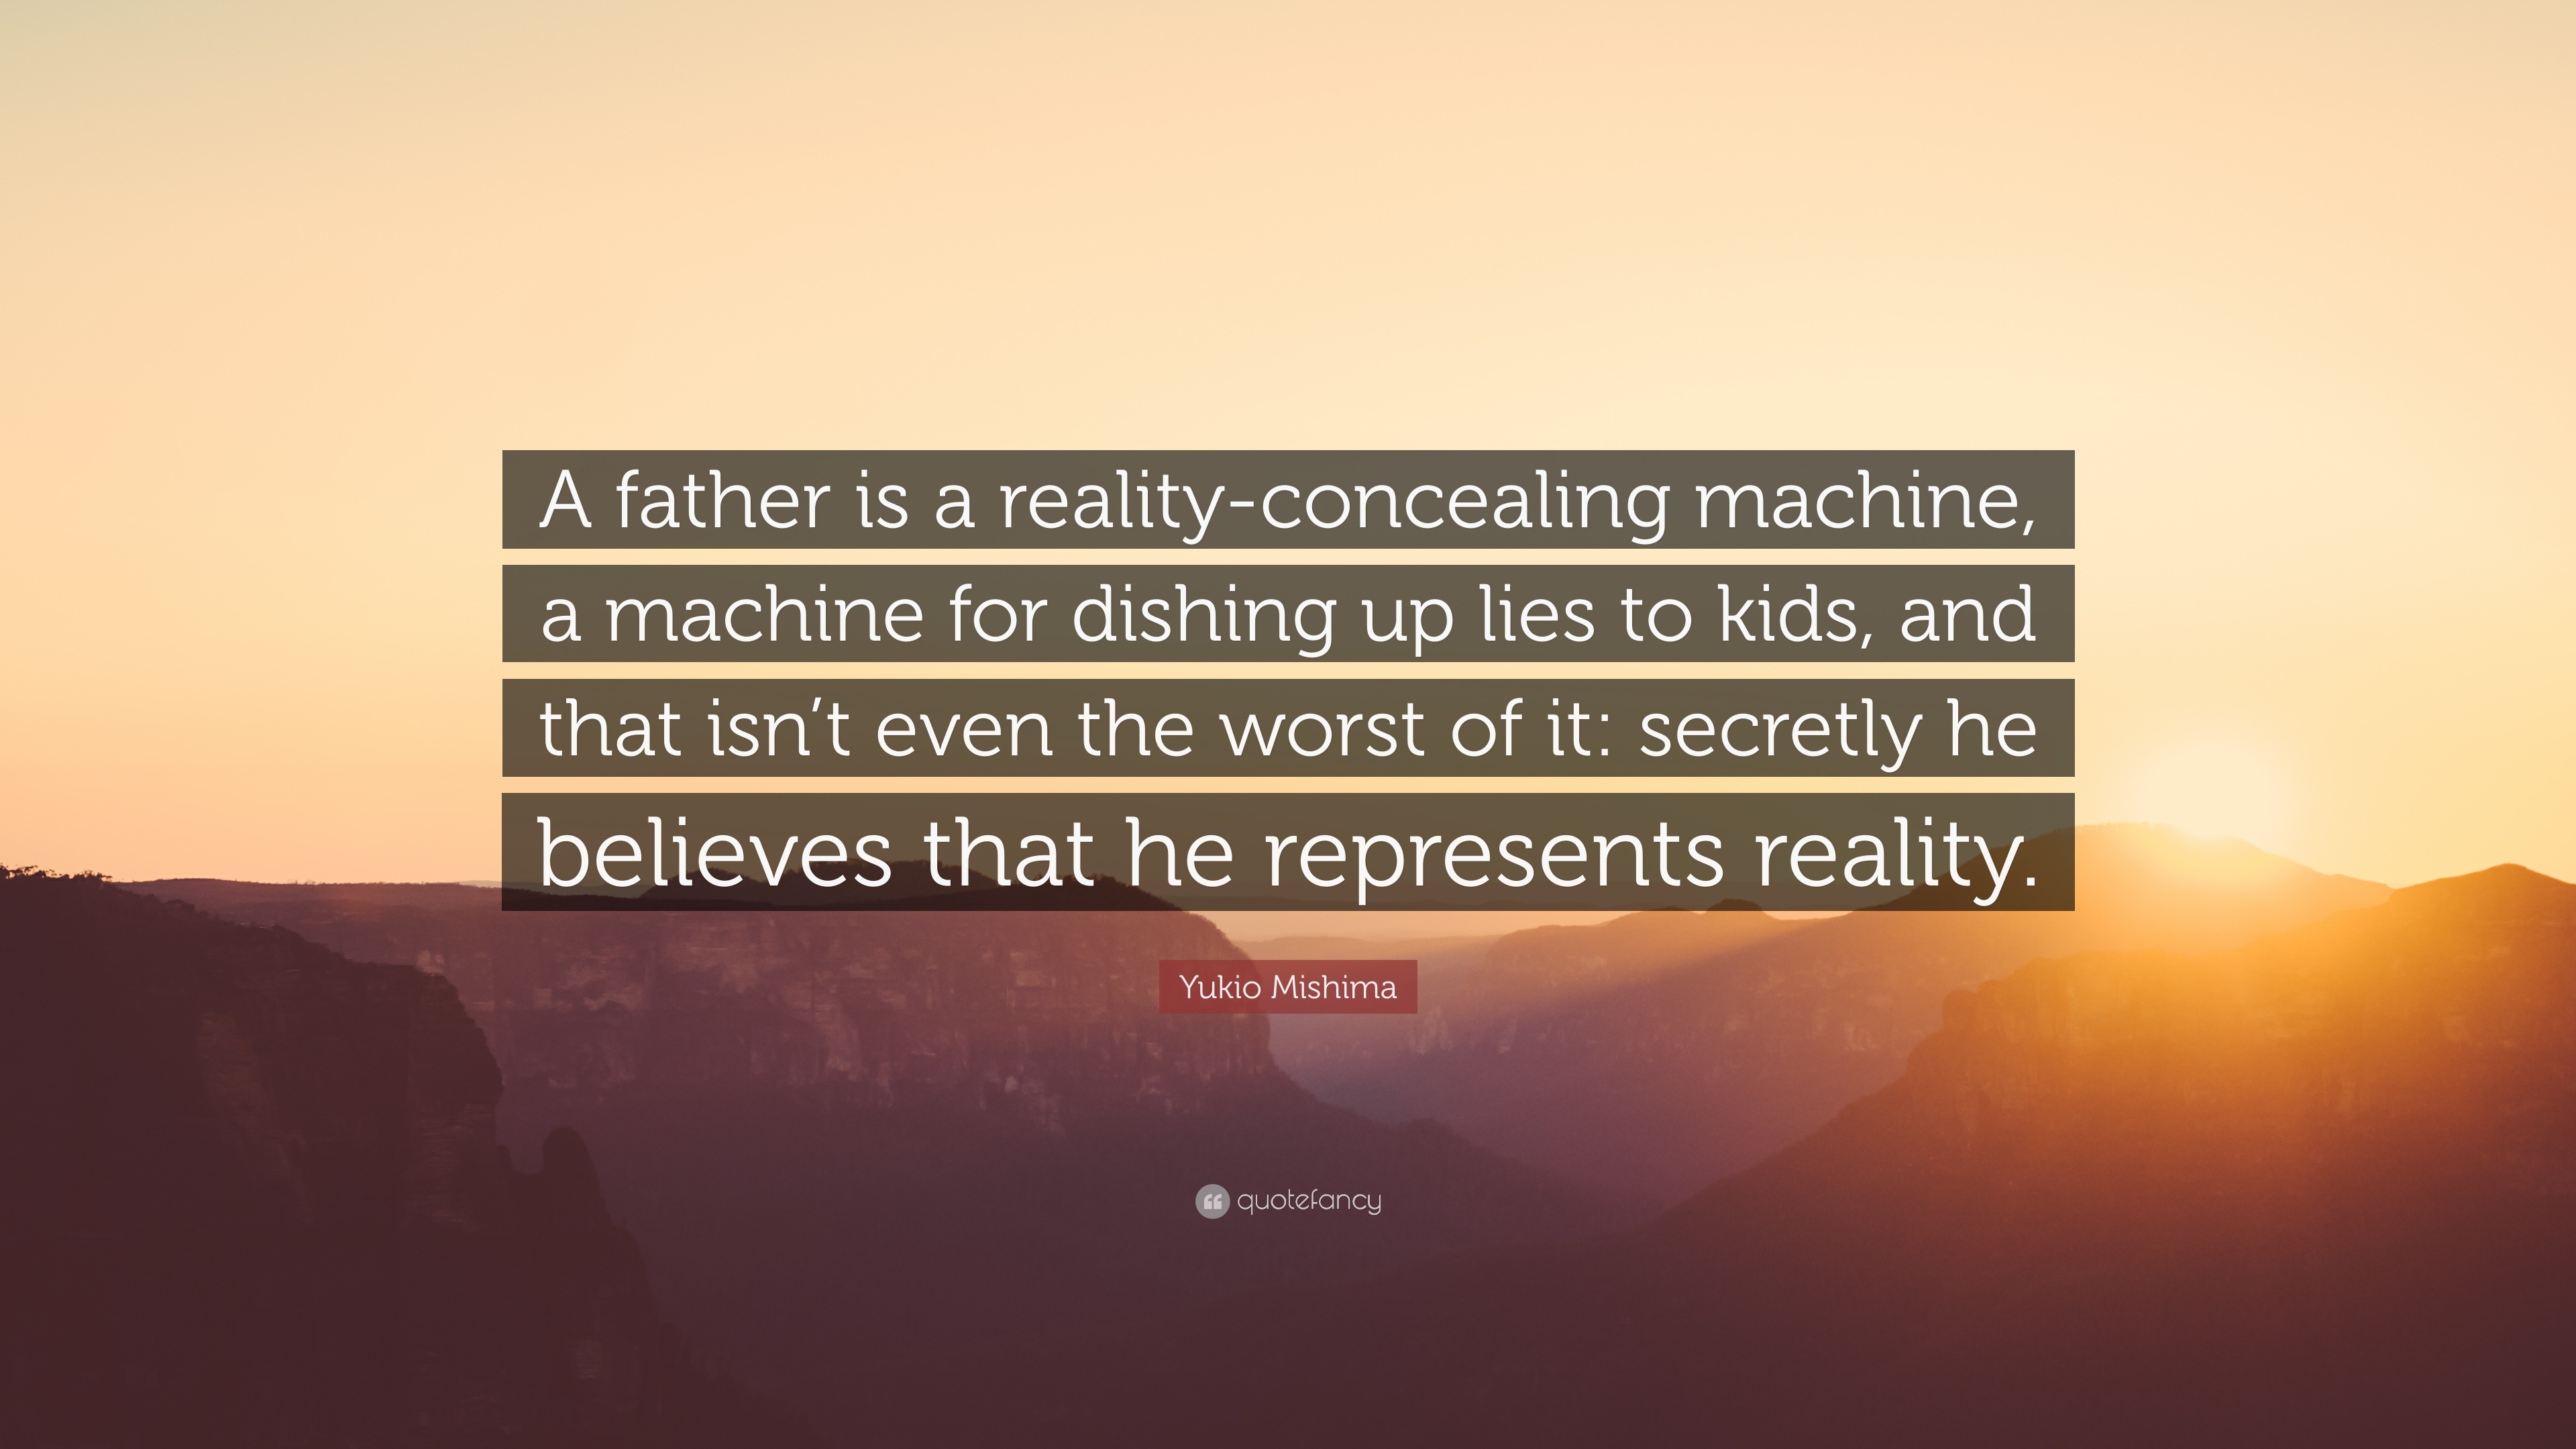 https://quotefancy.com/media/wallpaper/3840x2160/438295-Yukio-Mishima-Quote-A-father-is-a-reality-concealing-machine-a.jpg